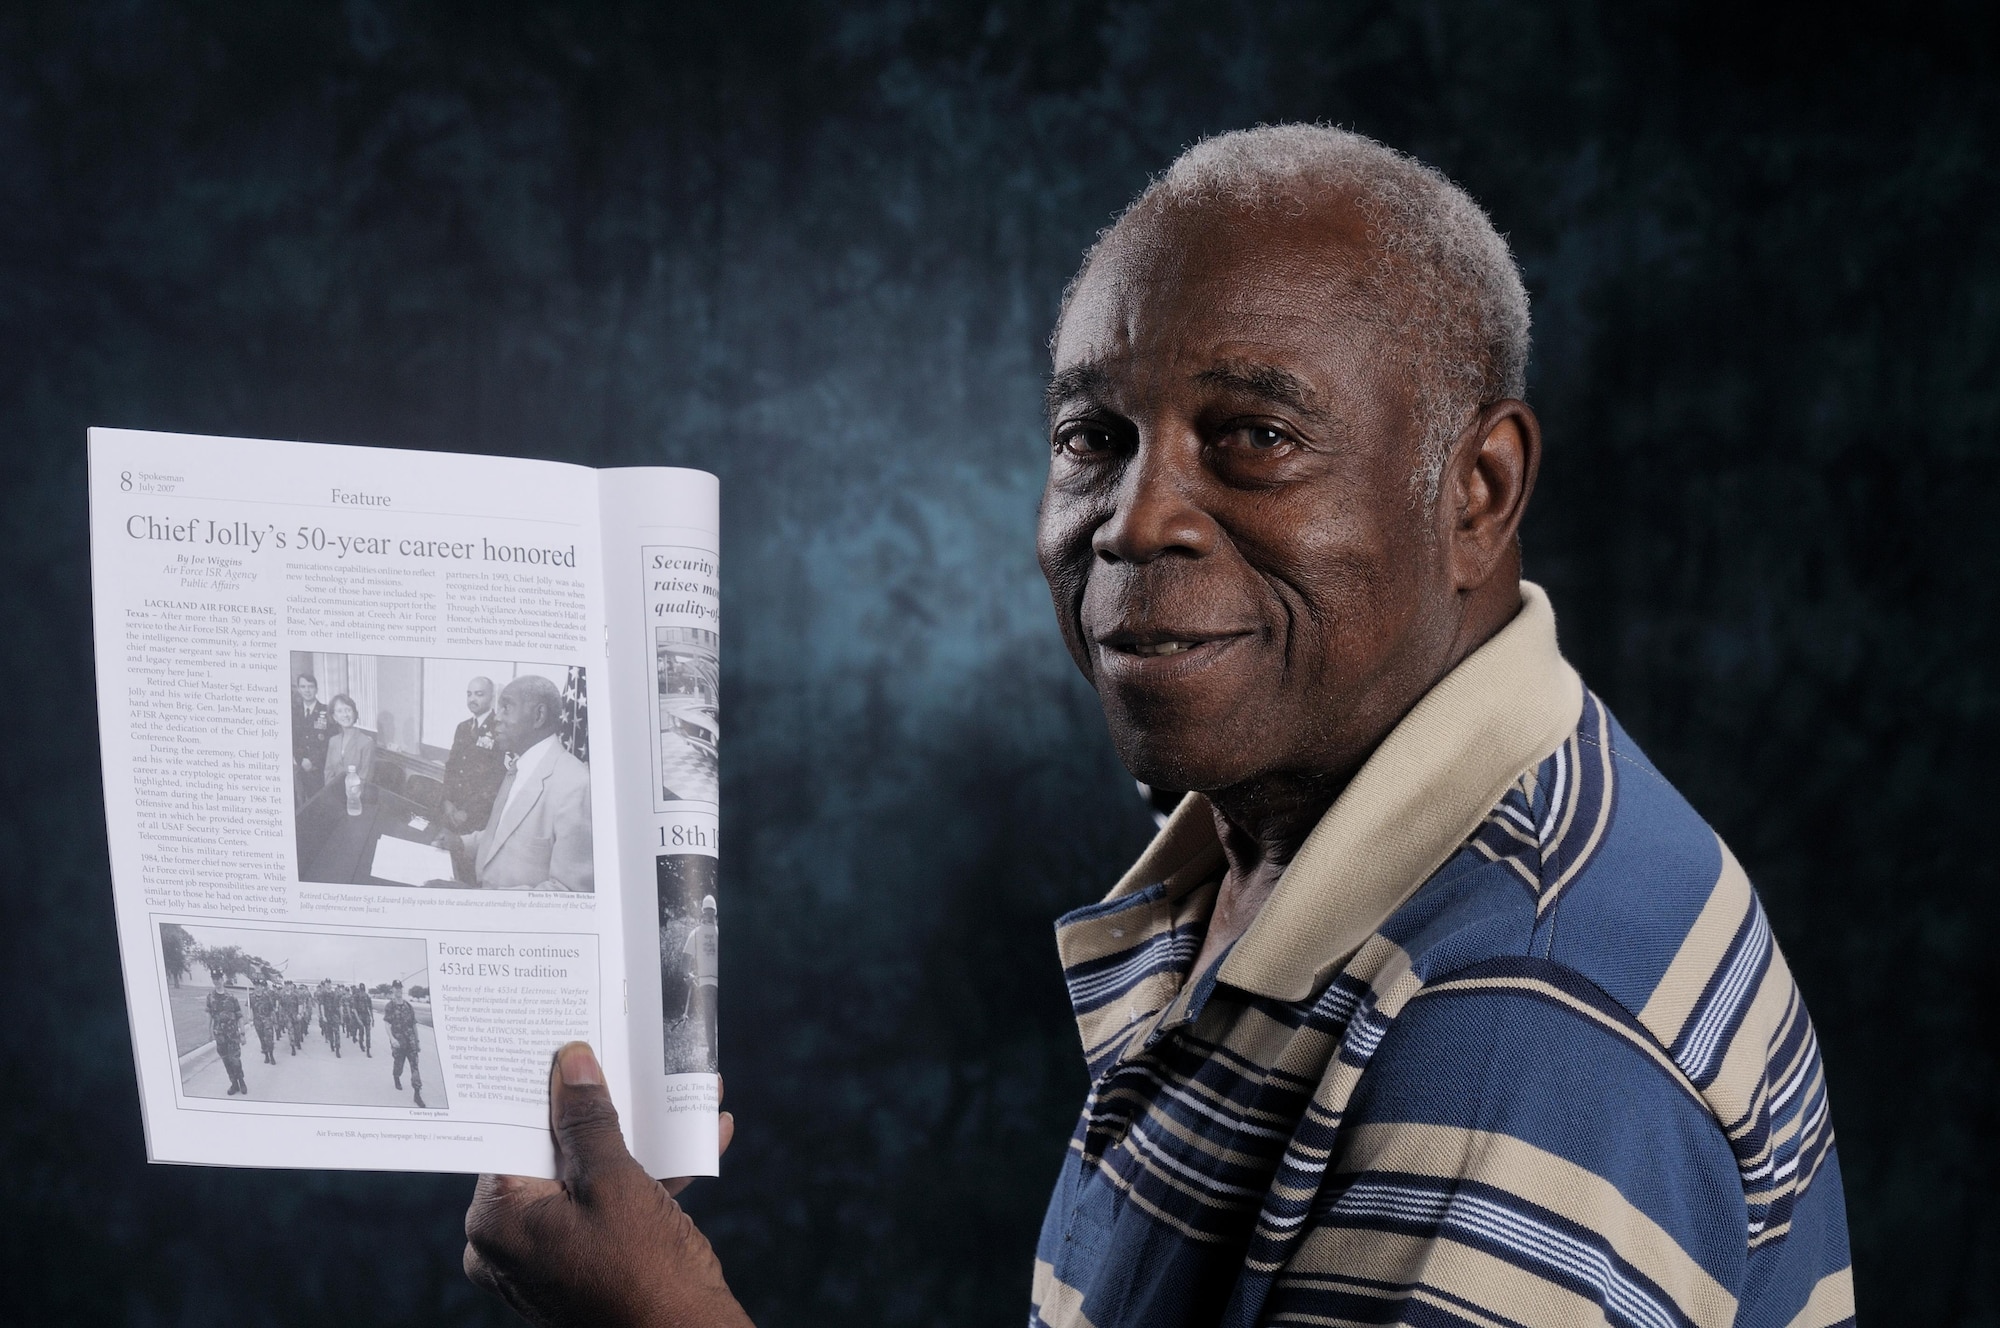 Mr. Edward Jolly, Jr, CMSgt, retired, 75, of the Air Force Intelligence, Surveillance and Reconnaissance Agency, A6, holds a Spokesman magazine showing an article depicting Jolly's 50 years of service, both military and civilian.  The AF ISR Agency/A6 Conference Room now bears his name.